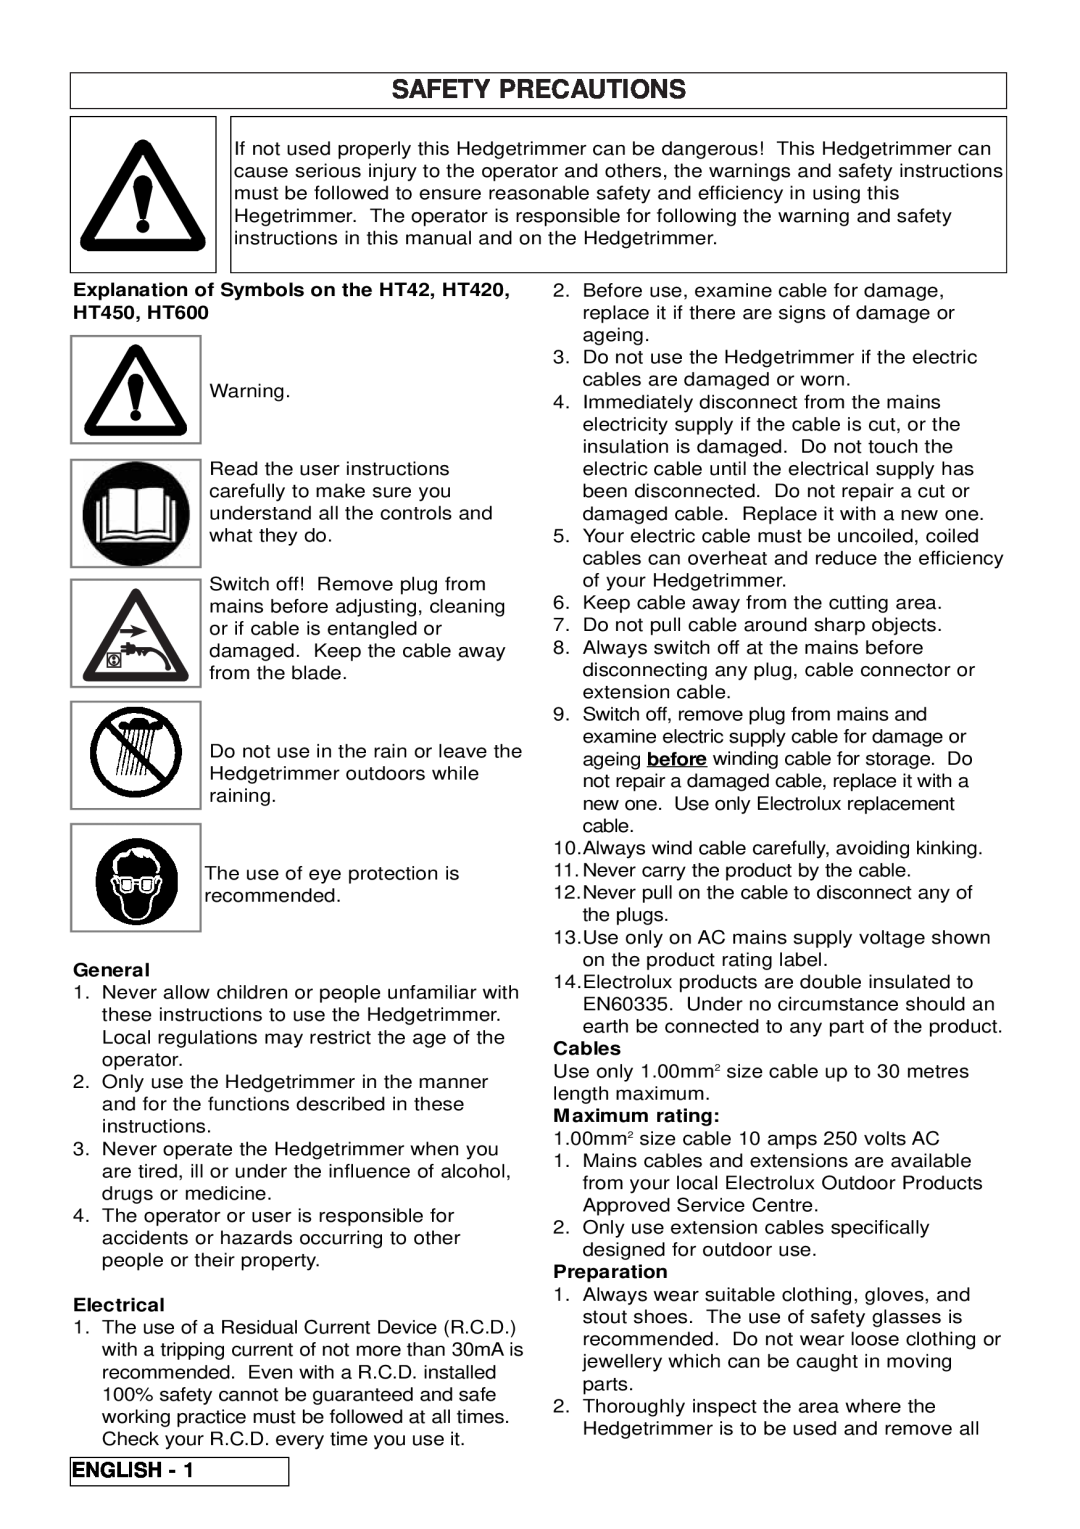 McCulloch Safety Precautions, English, Explanation of Symbols on the HT42, HT420, HT450, HT600, General, Electrical 